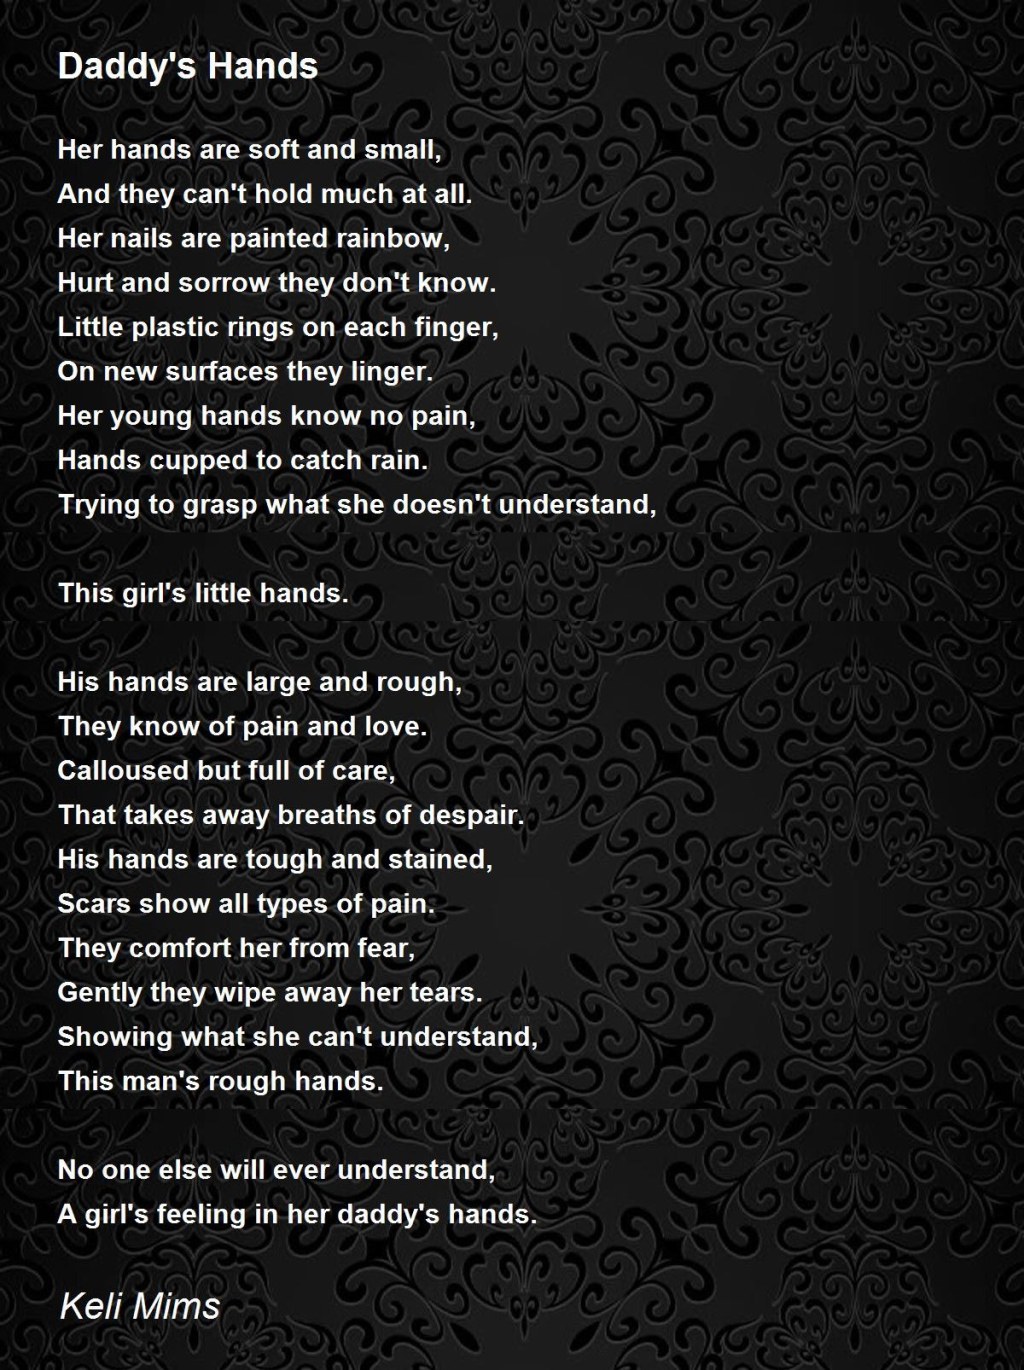 Picture of: Daddy’s Hands – Daddy’s Hands Poem by Keli Mims